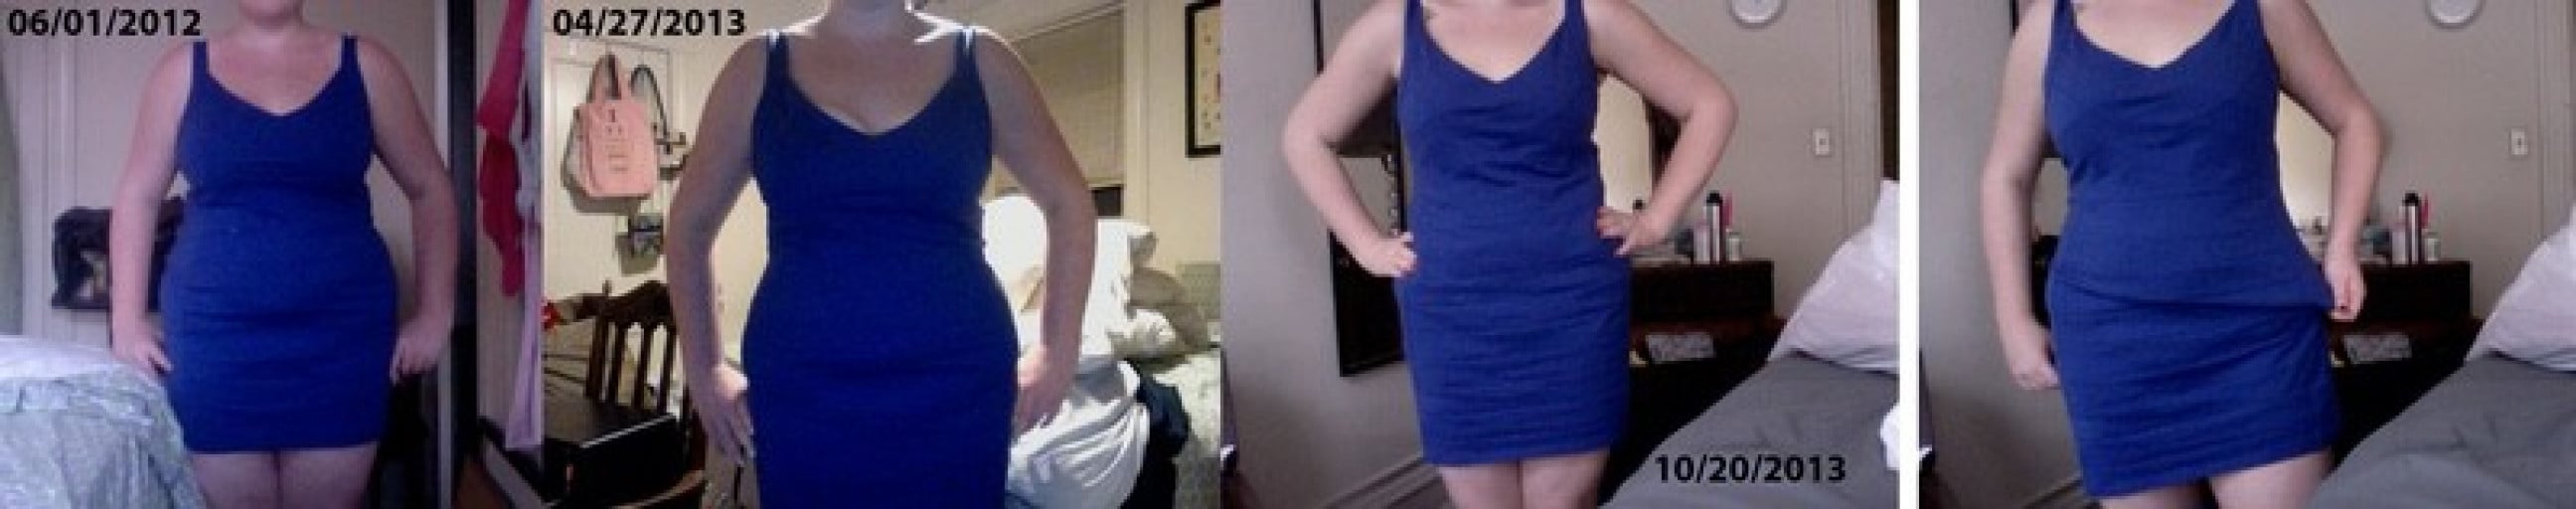 A progress pic of a 5'9" woman showing a fat loss from 245 pounds to 206 pounds. A respectable loss of 39 pounds.